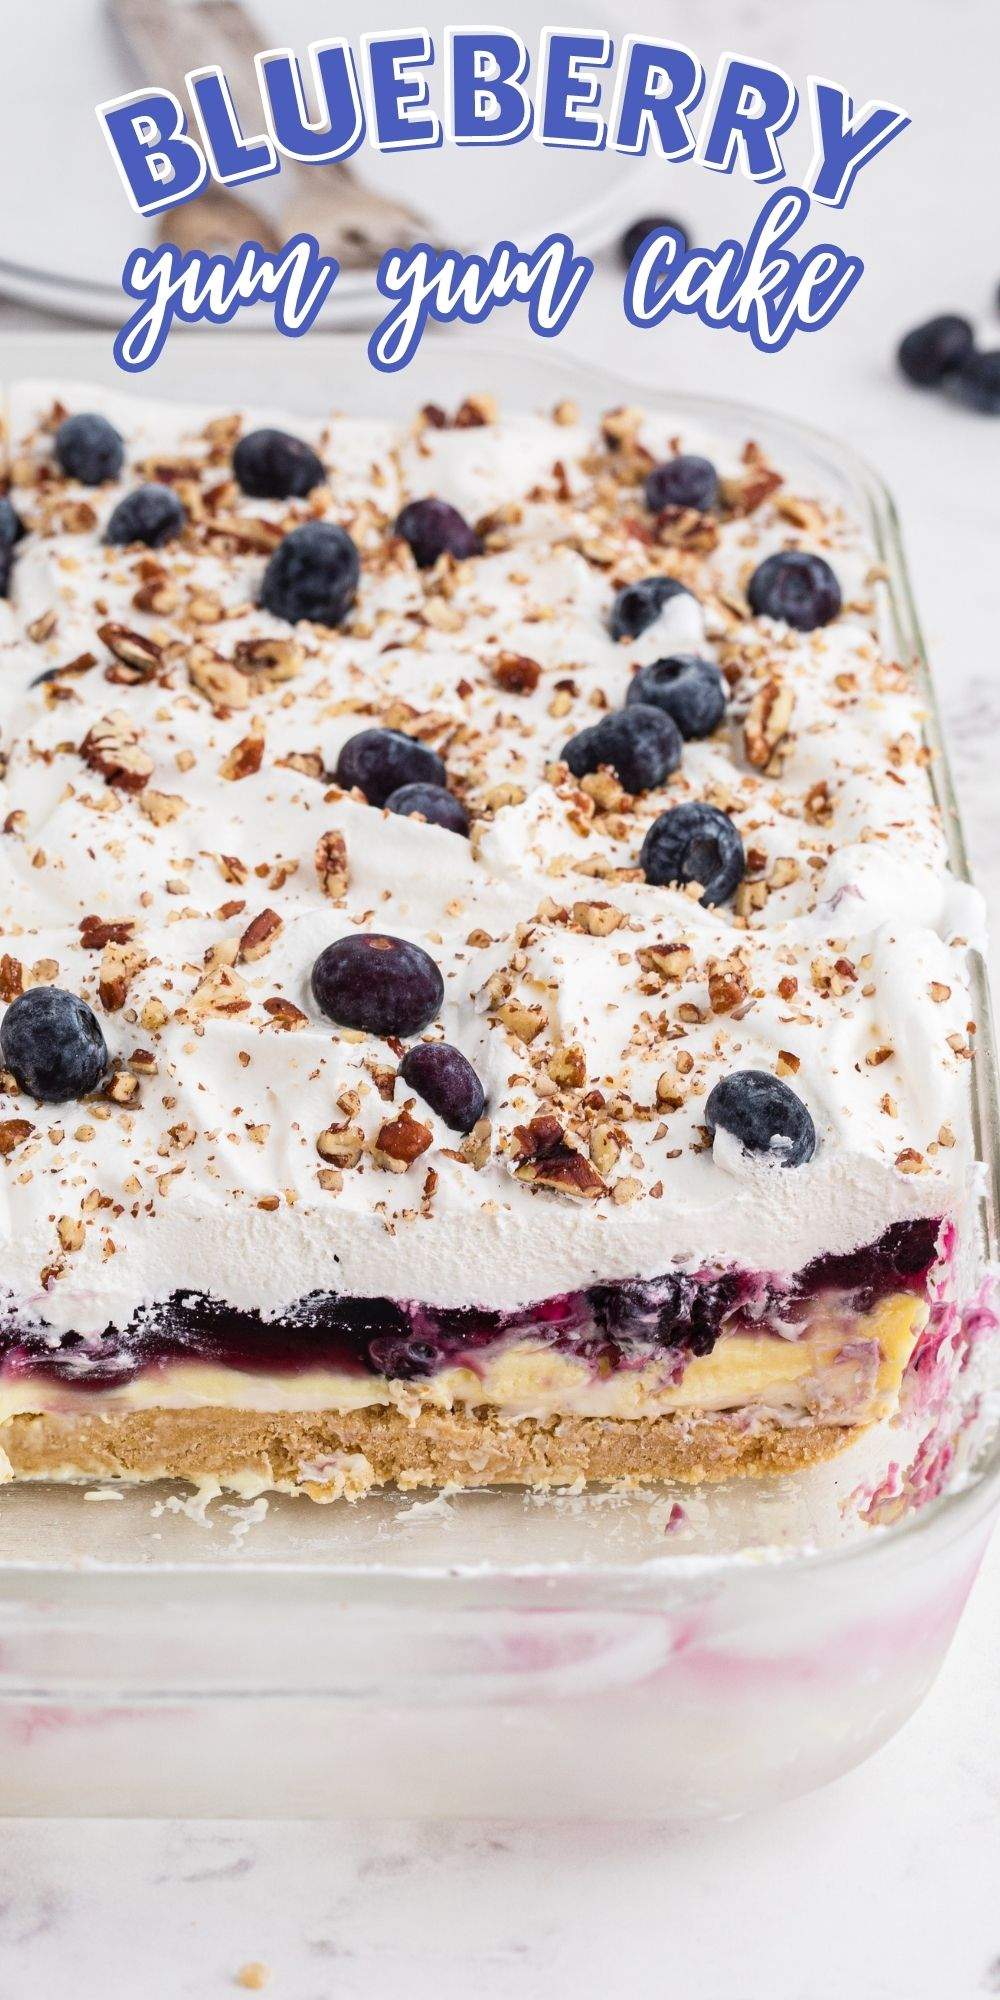 This Blueberry Yum Yum Cake is a refreshing layered cake dessert that is perfect for a party, a casual social barbecue, or whenever you want a creamy dessert. via @familyfresh